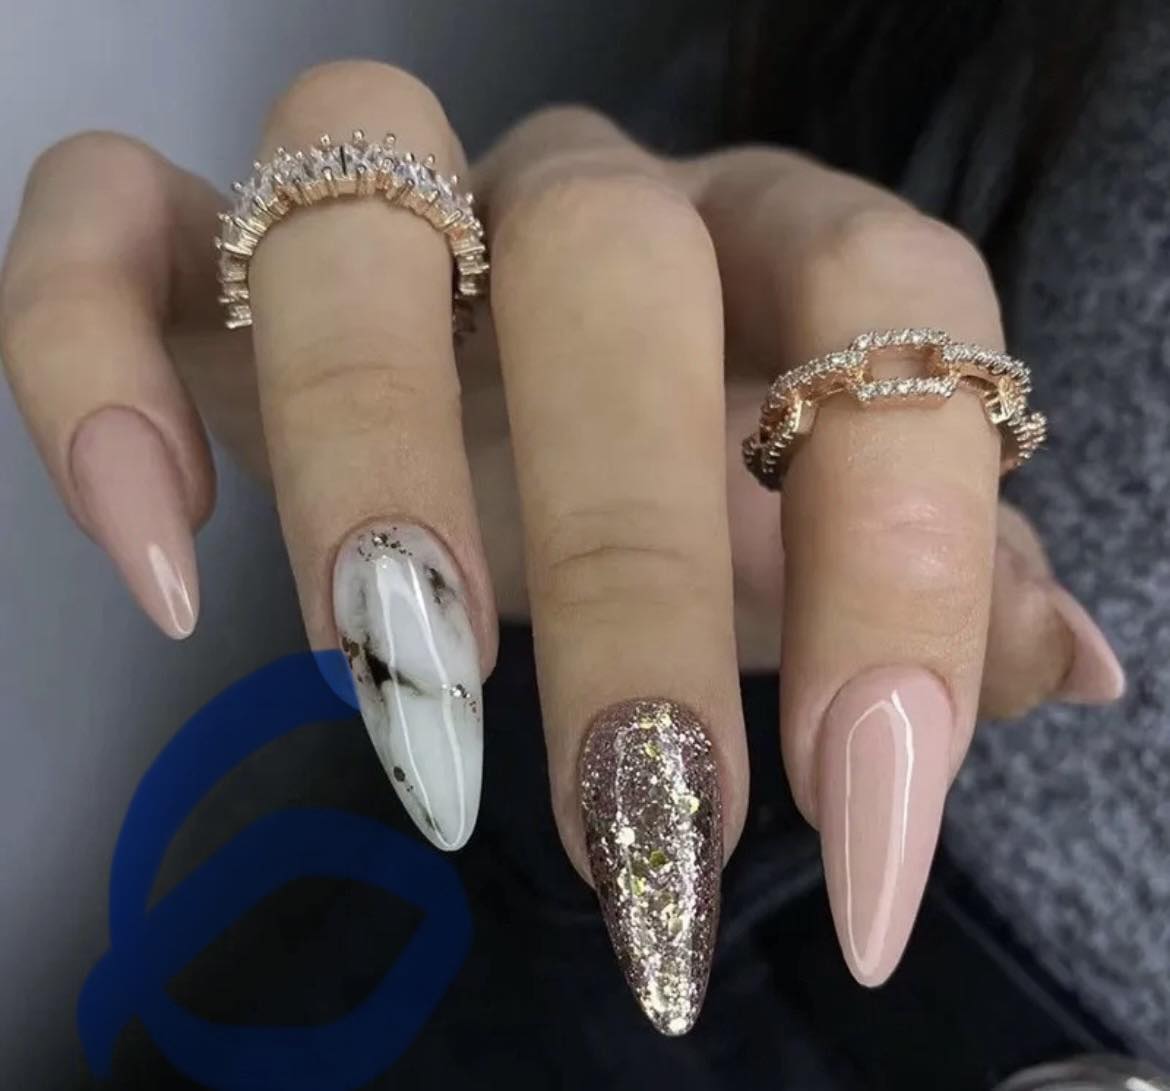 Pale Pink, White Marble & Gold Glitter Oval Nails.